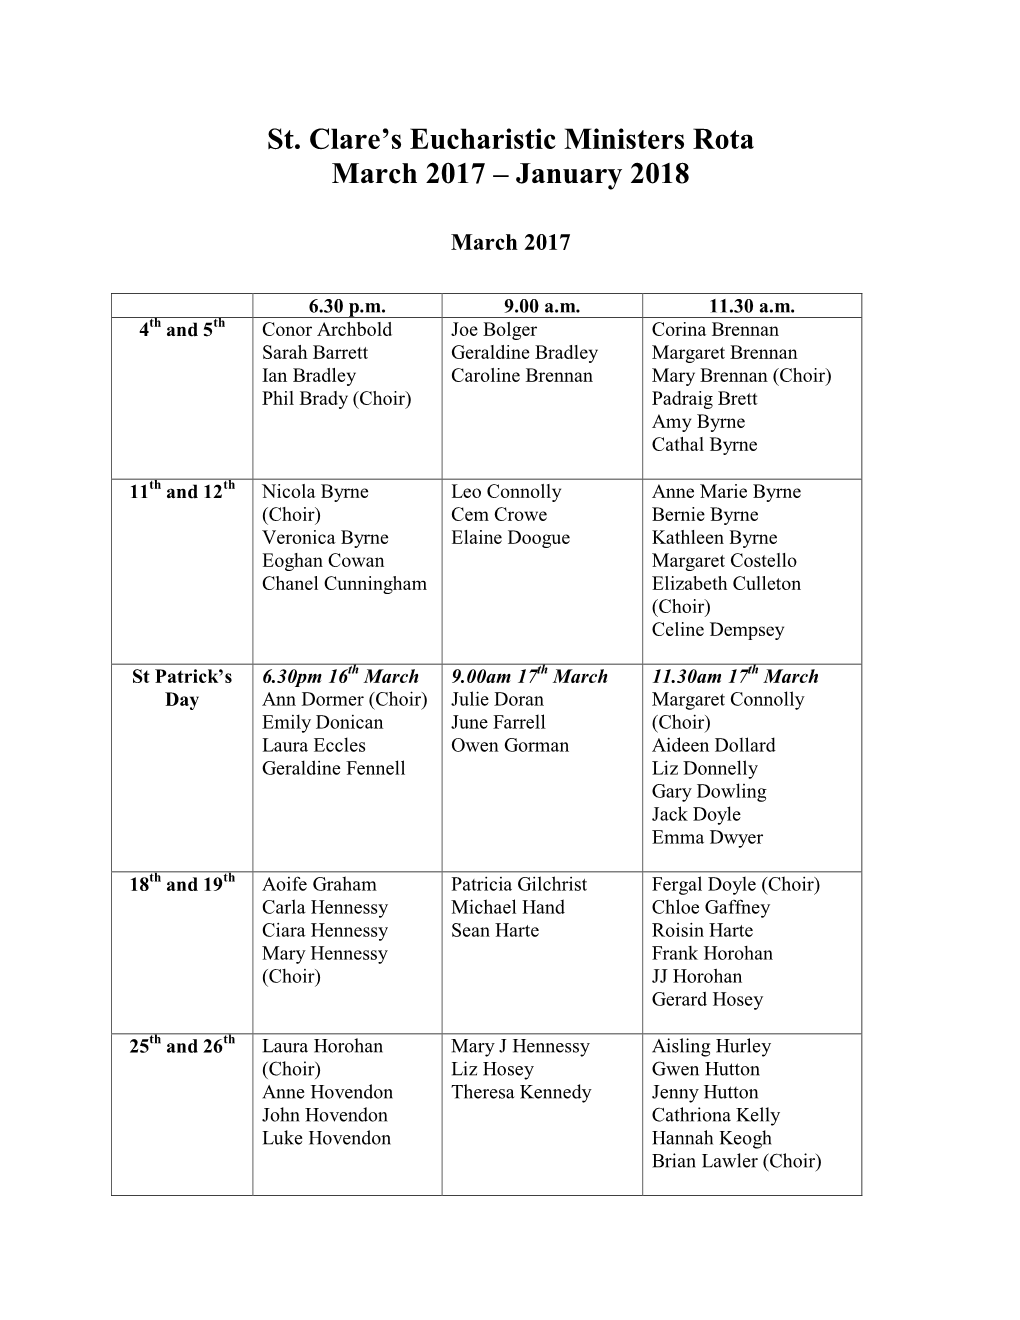 St. Clare's Eucharistic Ministers Rota March 2017 – January 2018